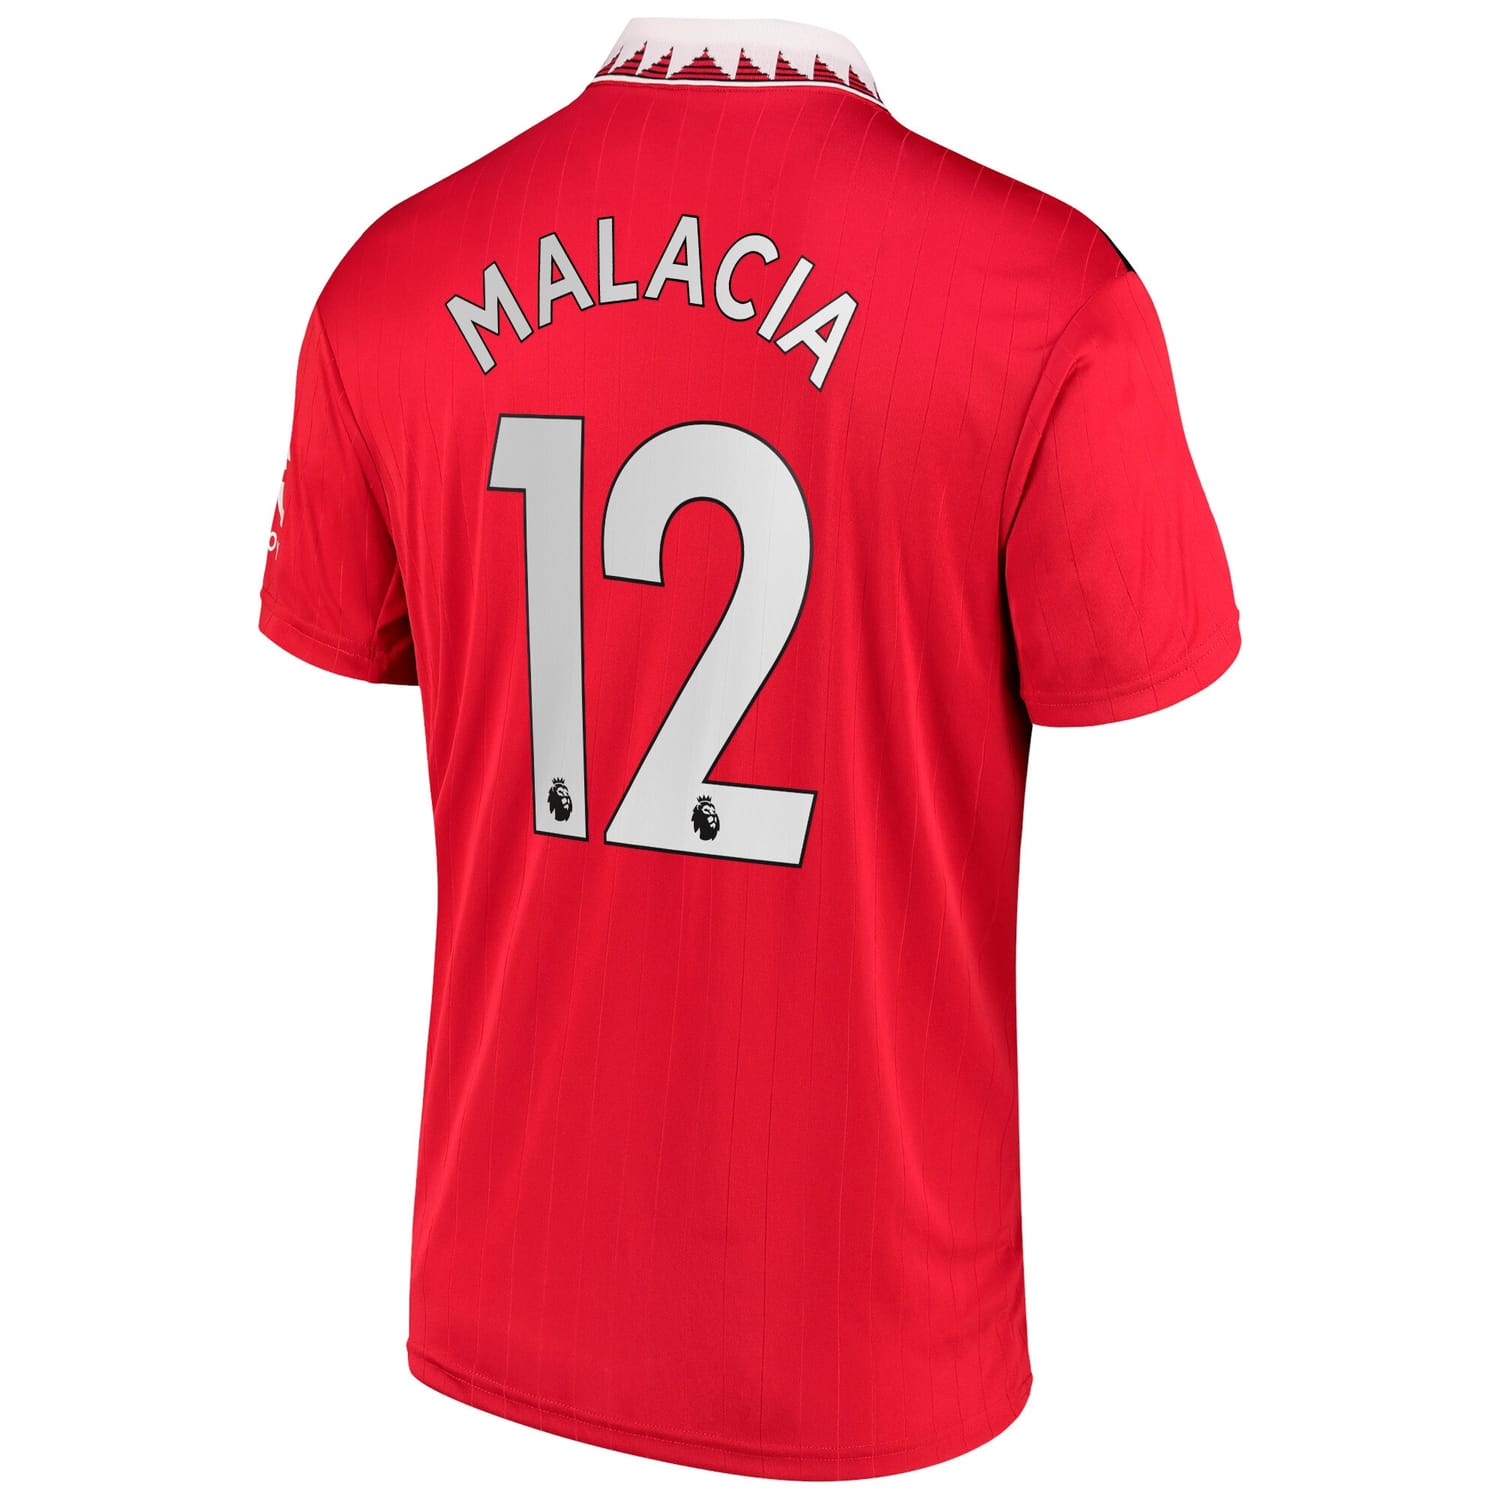 Premier League Manchester United Home Jersey Shirt 2022-23 player Tyrell Malacia 12 printing for Men